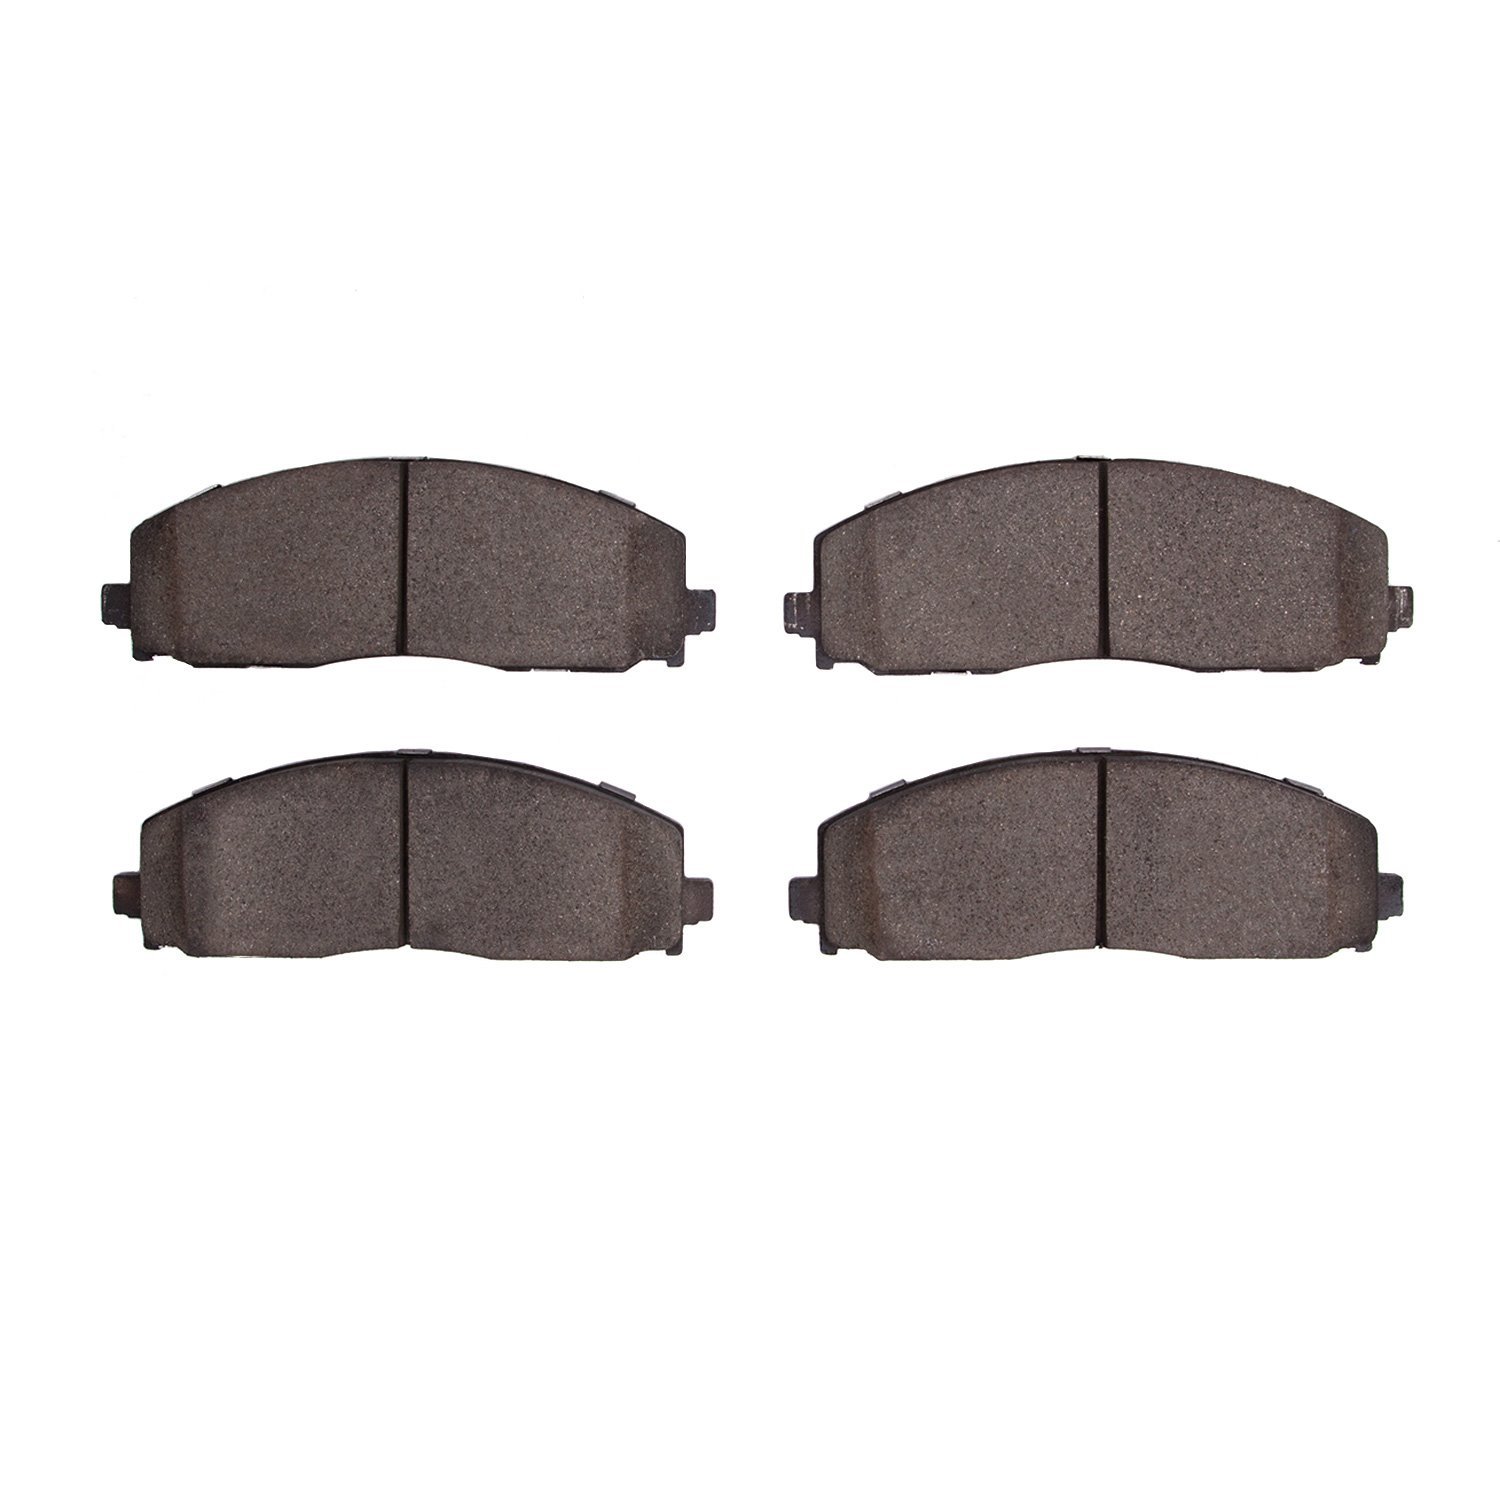 Optimum OE Brake Pads, Fits Select Fits Multiple Makes/Models, Position: Front